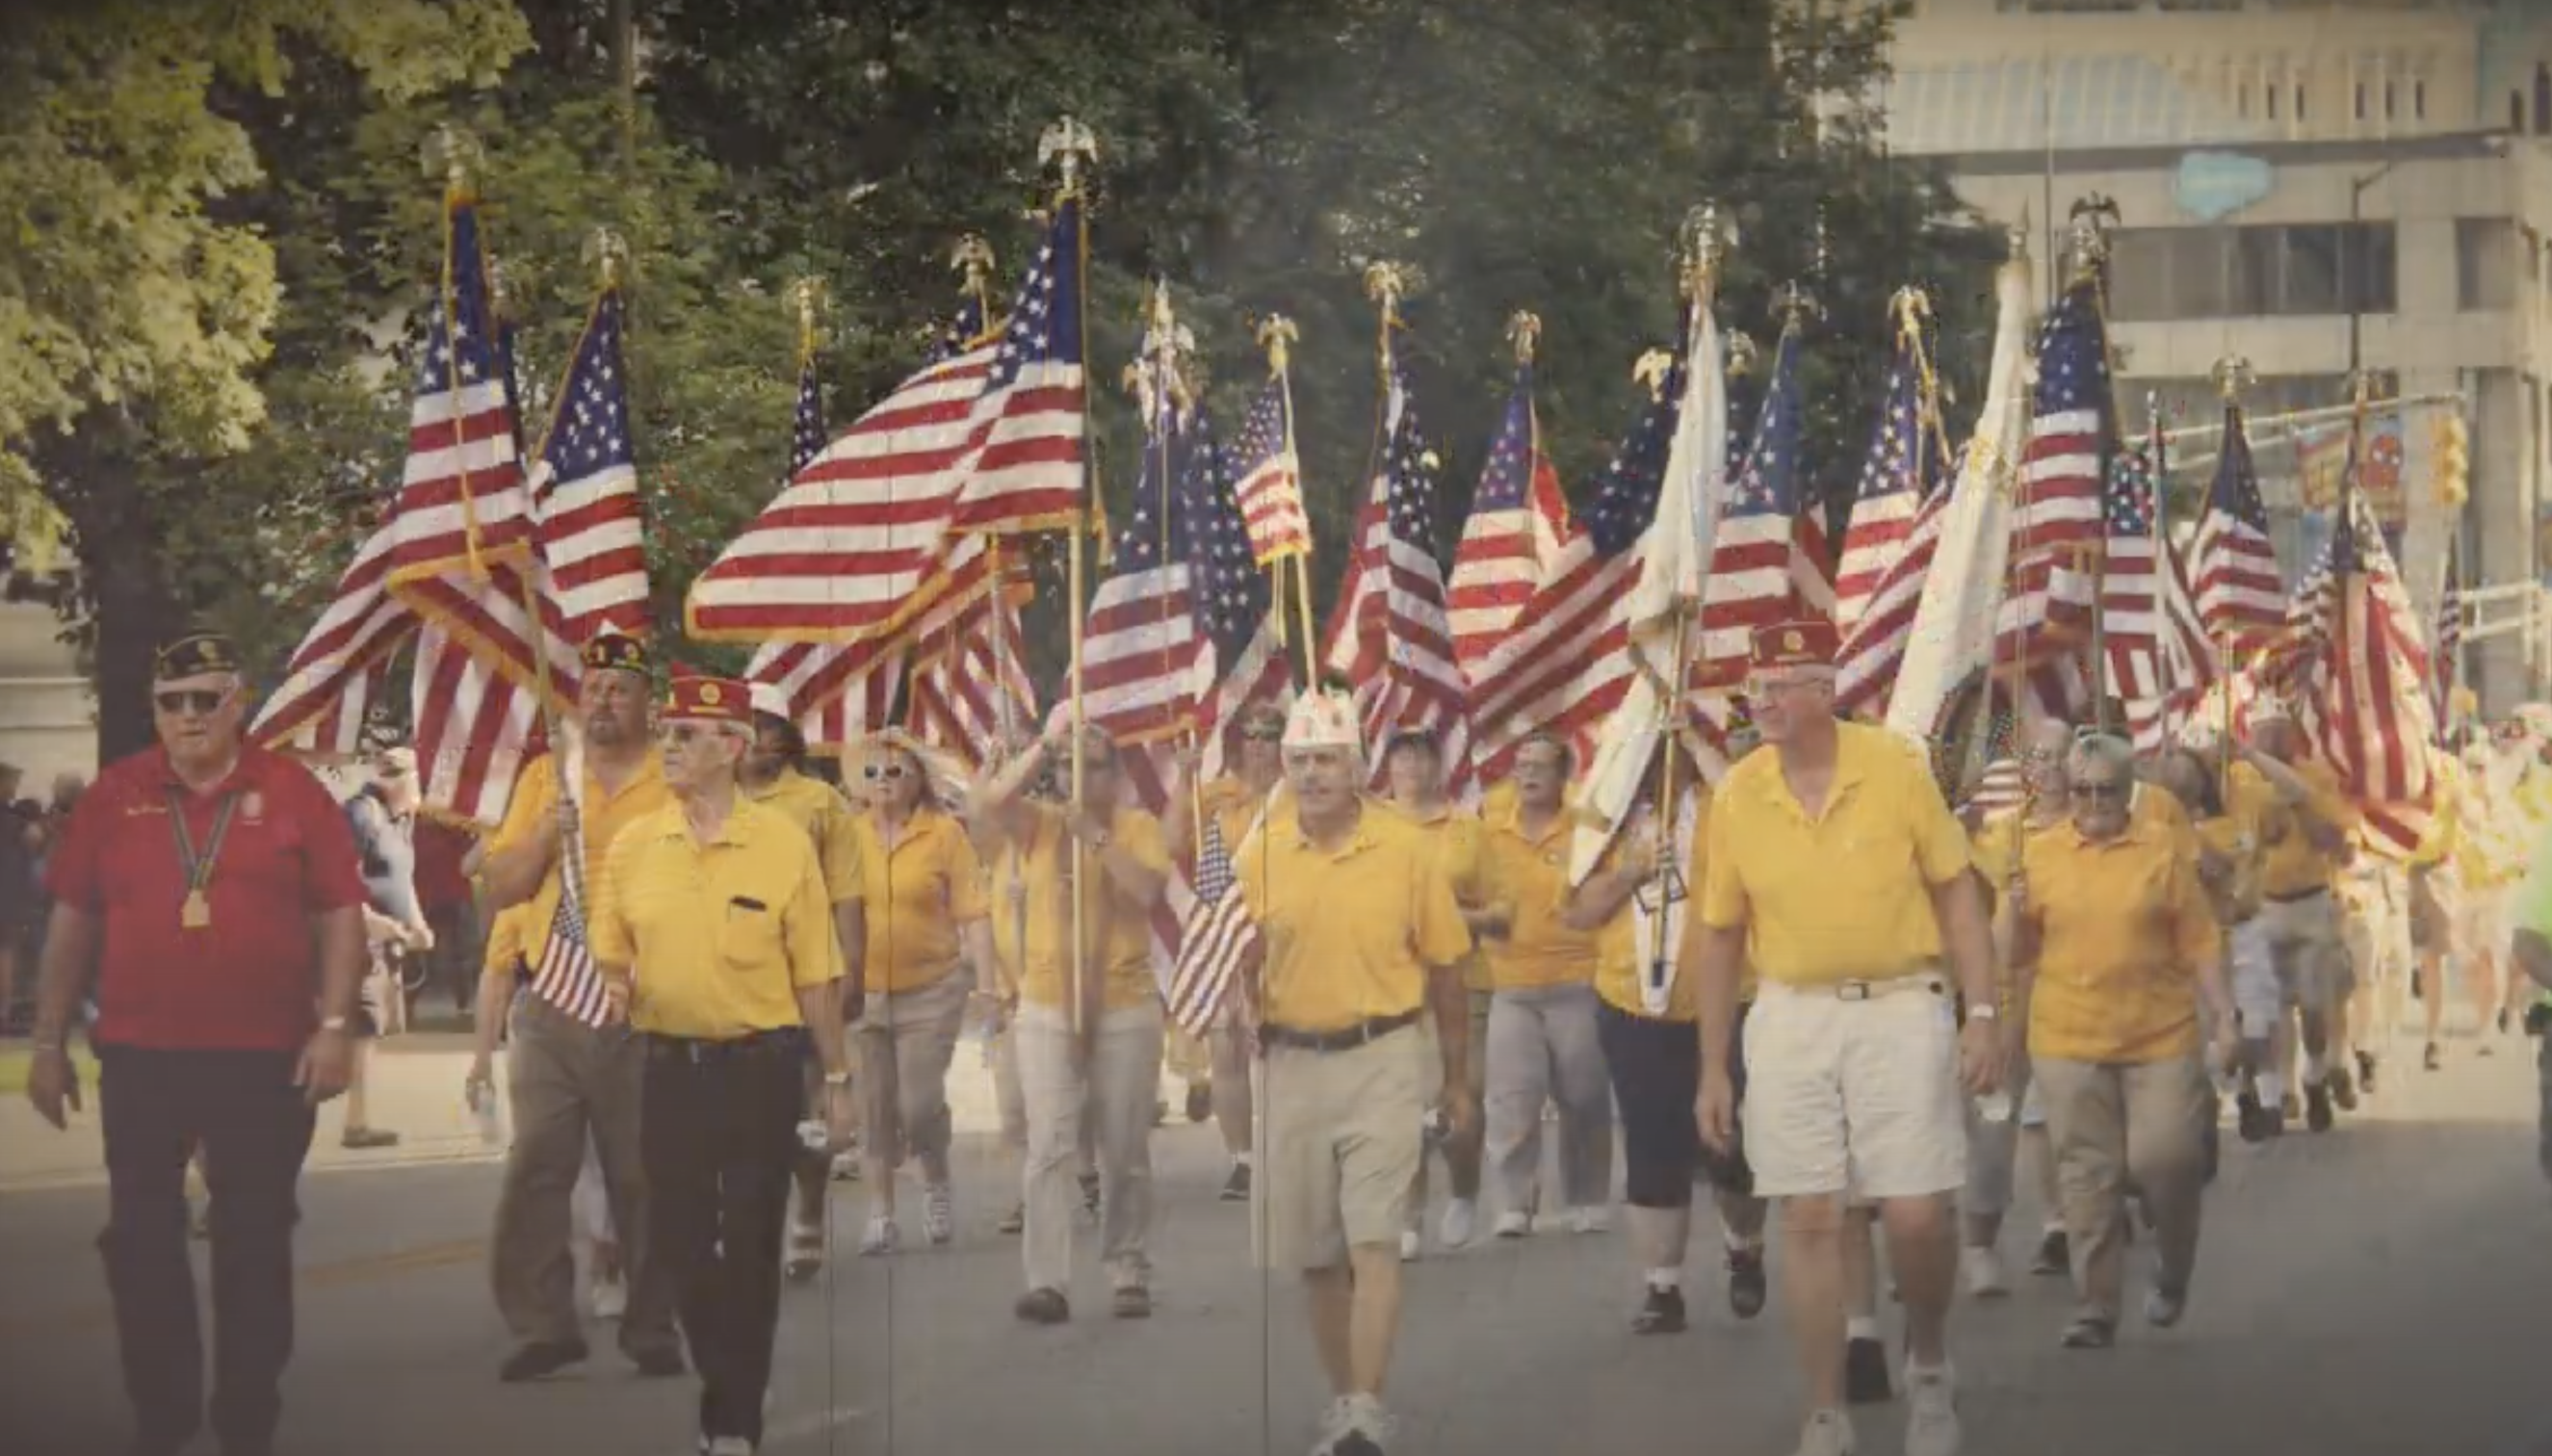 veterans march in parade 4th of July